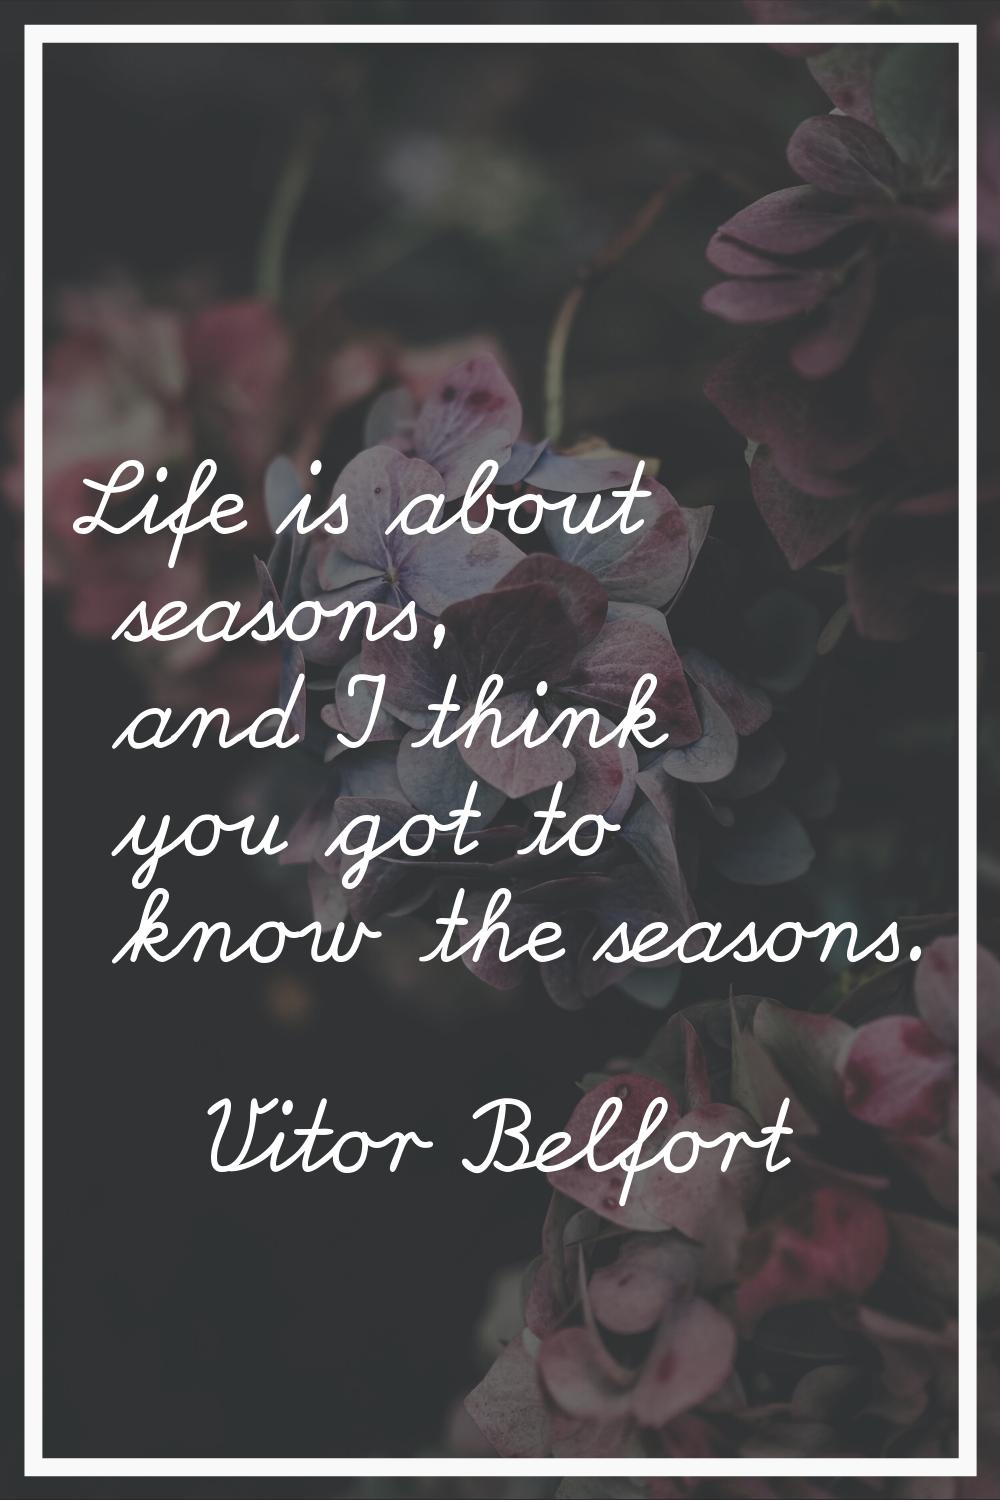 Life is about seasons, and I think you got to know the seasons.